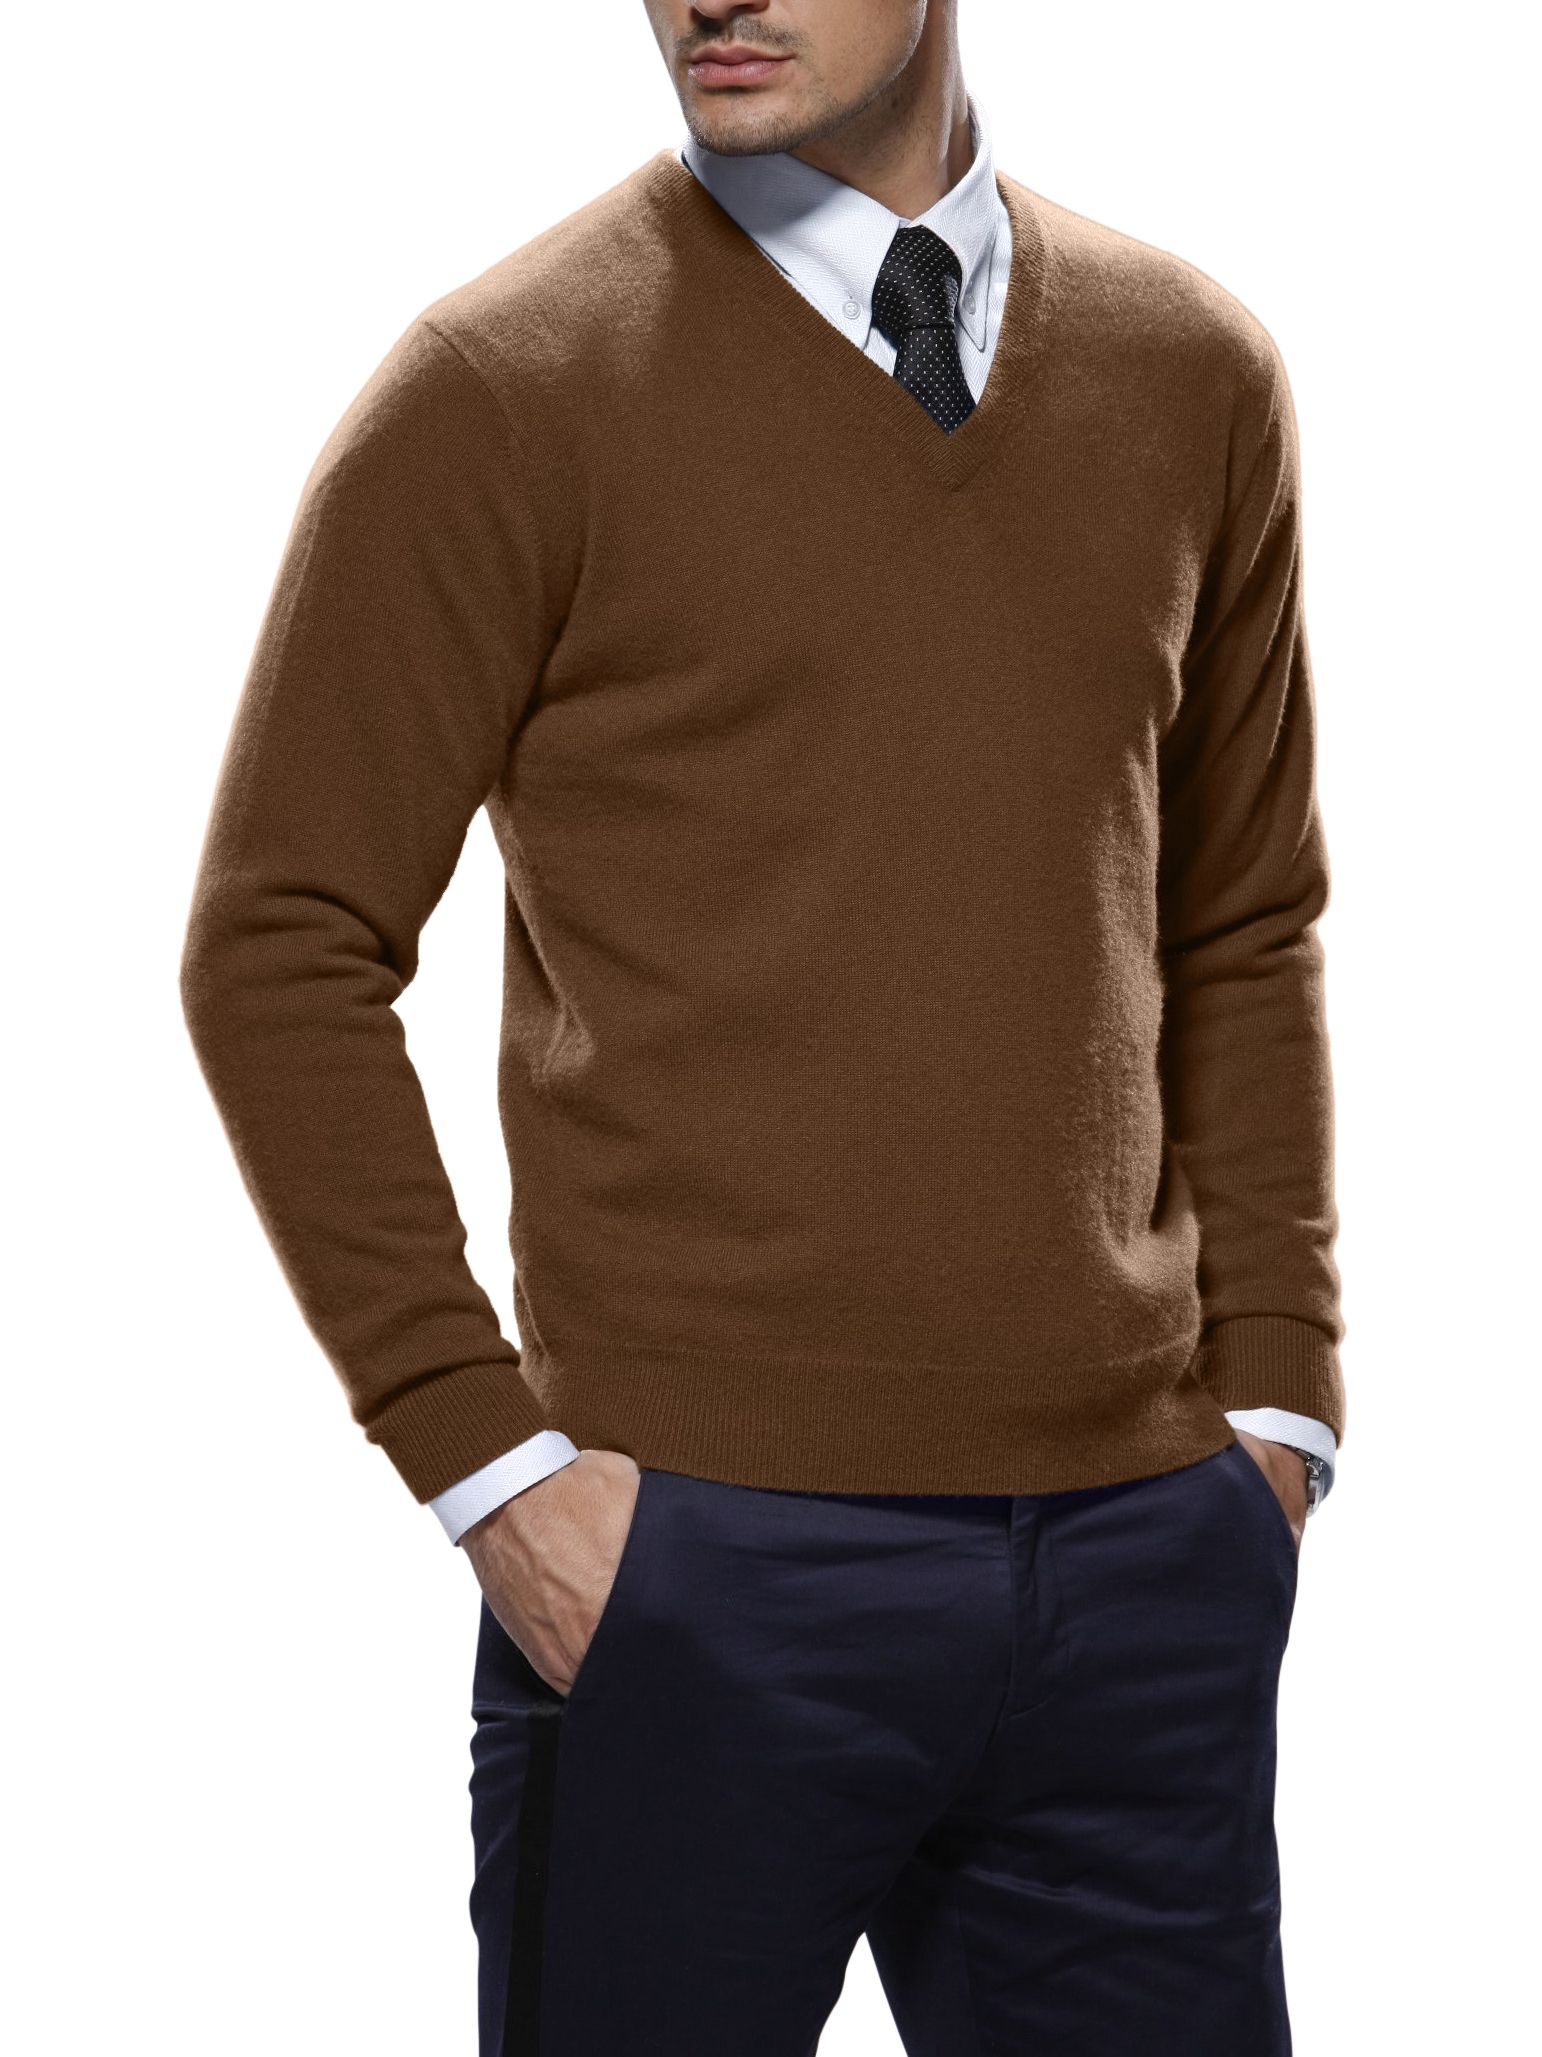 Syrup Brown Merino Wool V-Neck Sweater